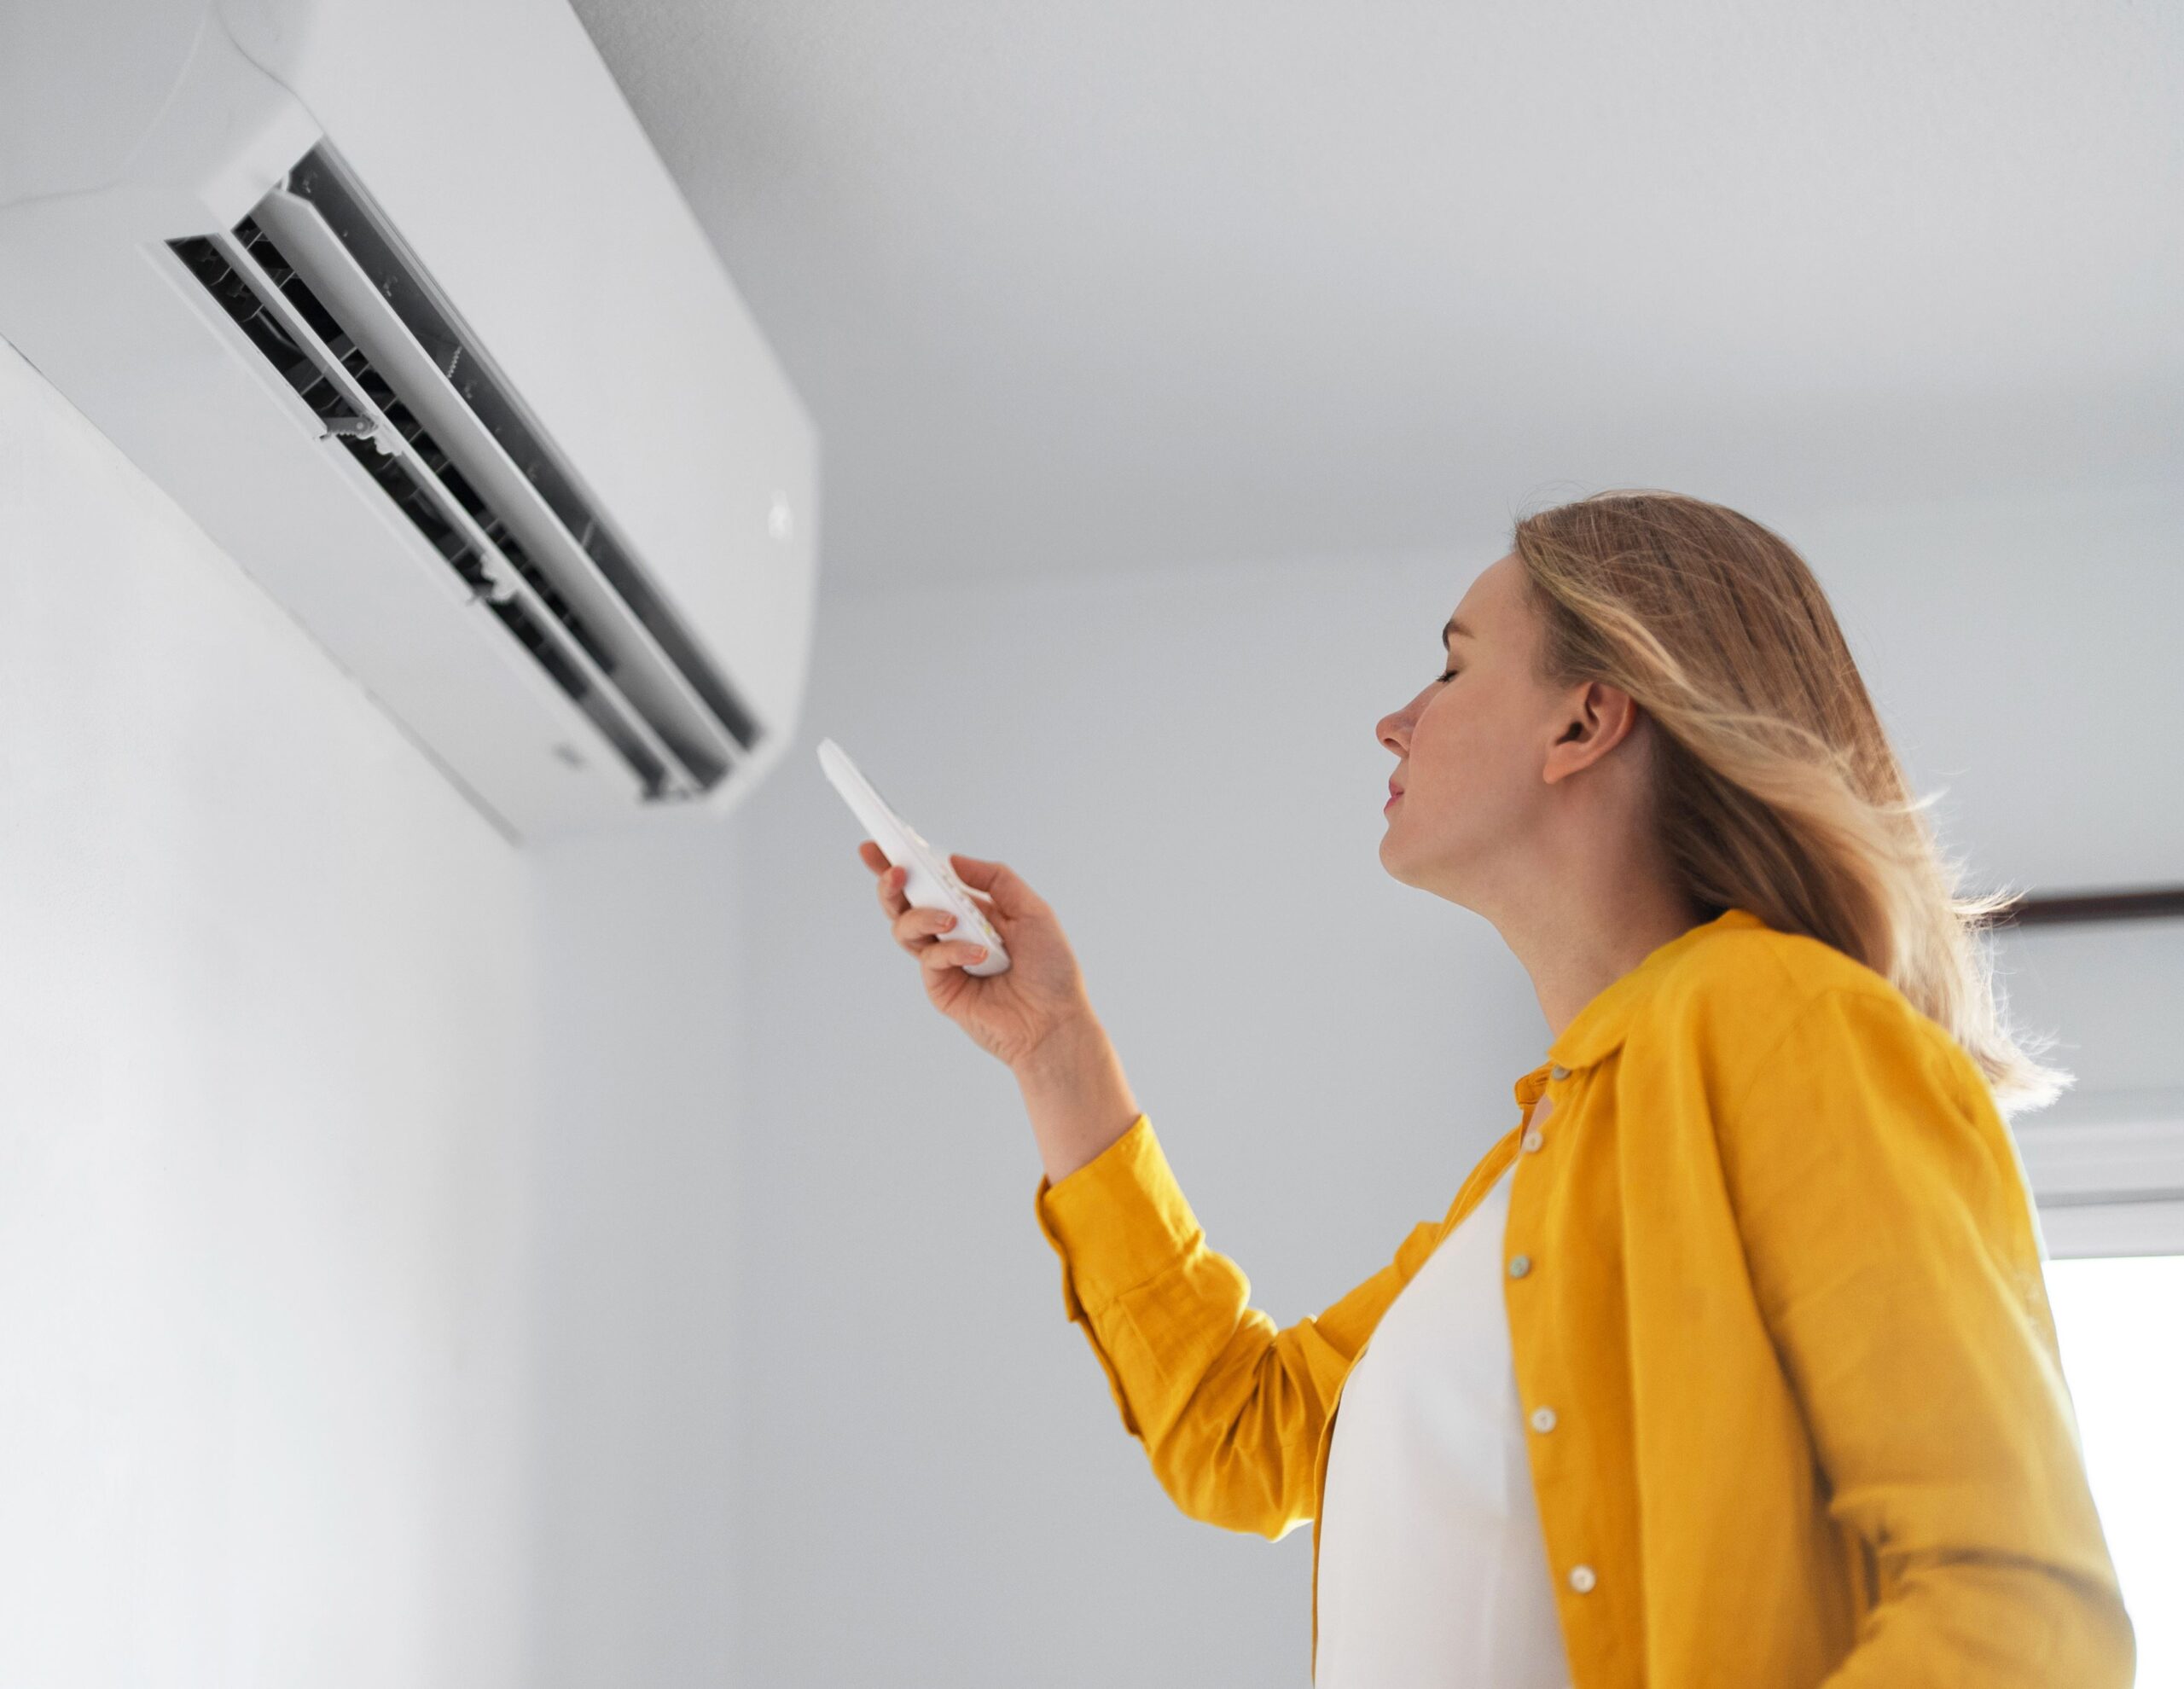 Air Conditioner Canada  Canada's #1 source for airconditioners